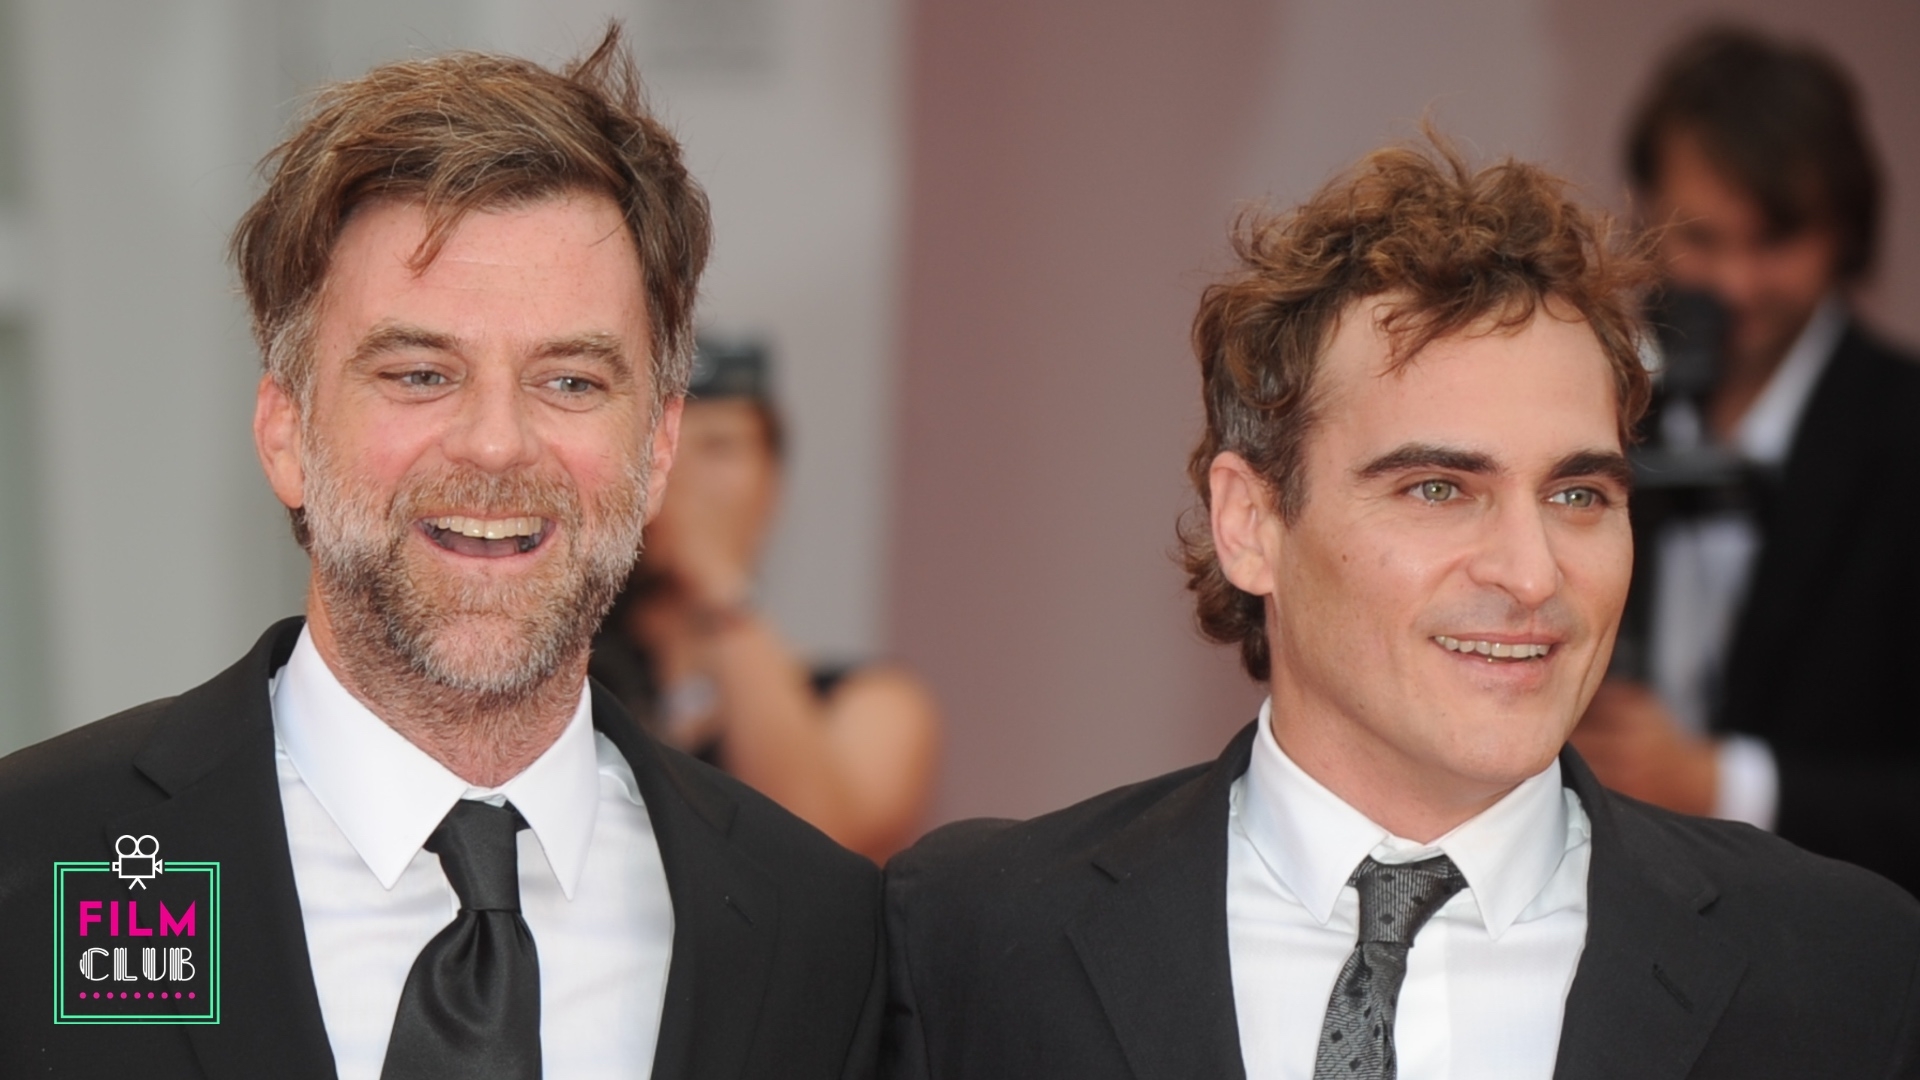 Joaquin Phoenix brought out the mysterious, ambiguous side of Paul Thomas Anderson